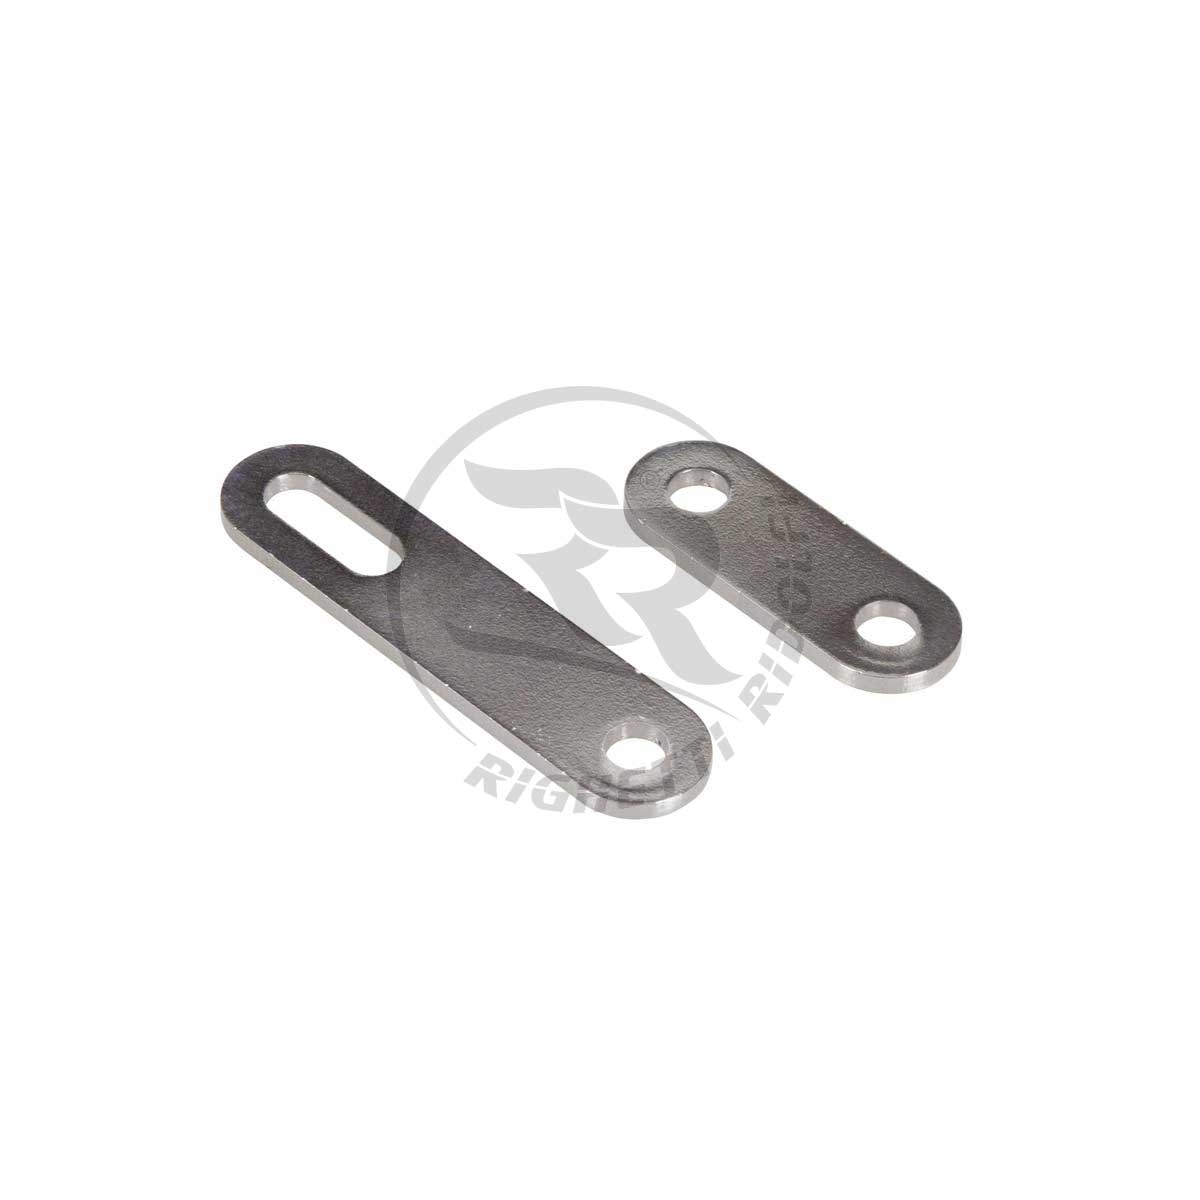 Picture of Bracket set for KZ Chain Guard K956